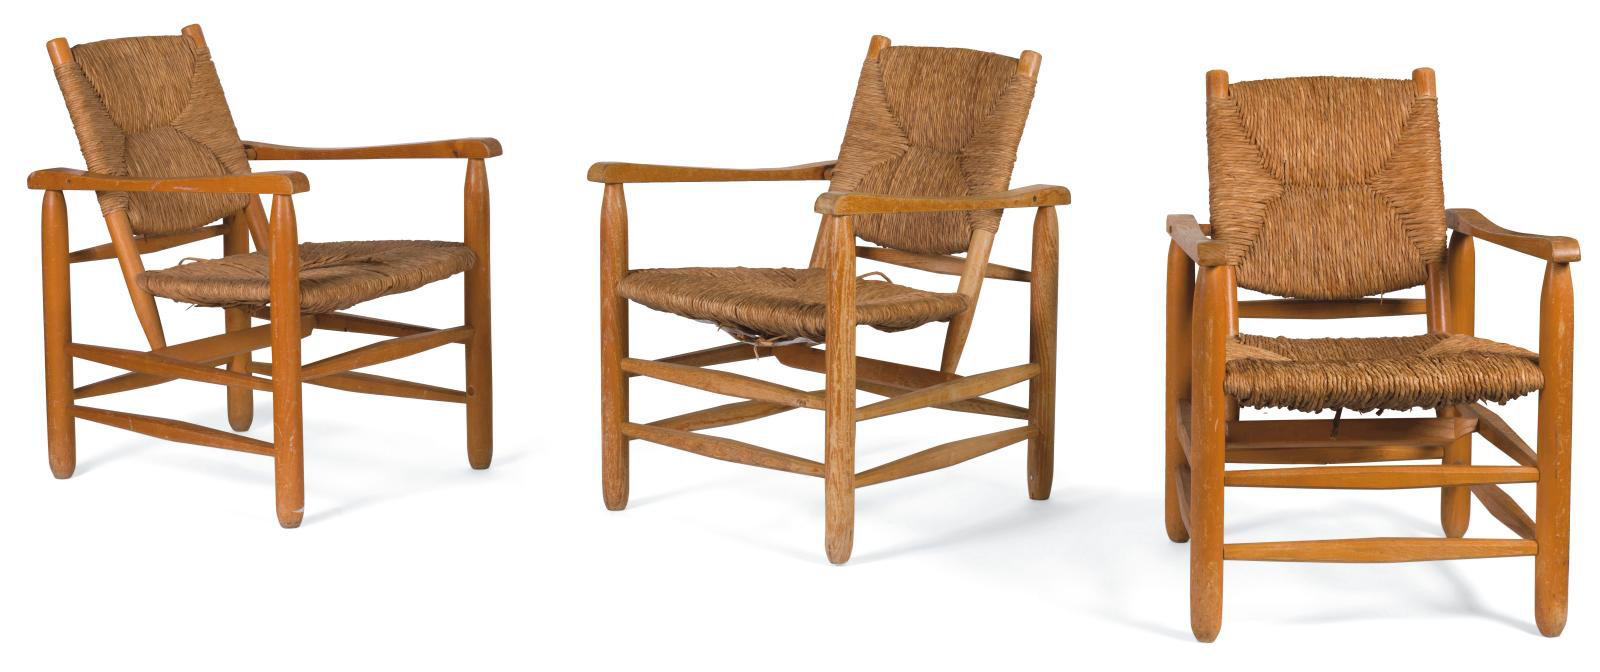 Charlotte Perriand (1903-1999) designer & Sentou éditeur, Chamrousse, based on Fauteuil n°21, suite of three ash and straw chairs, 78 x 55